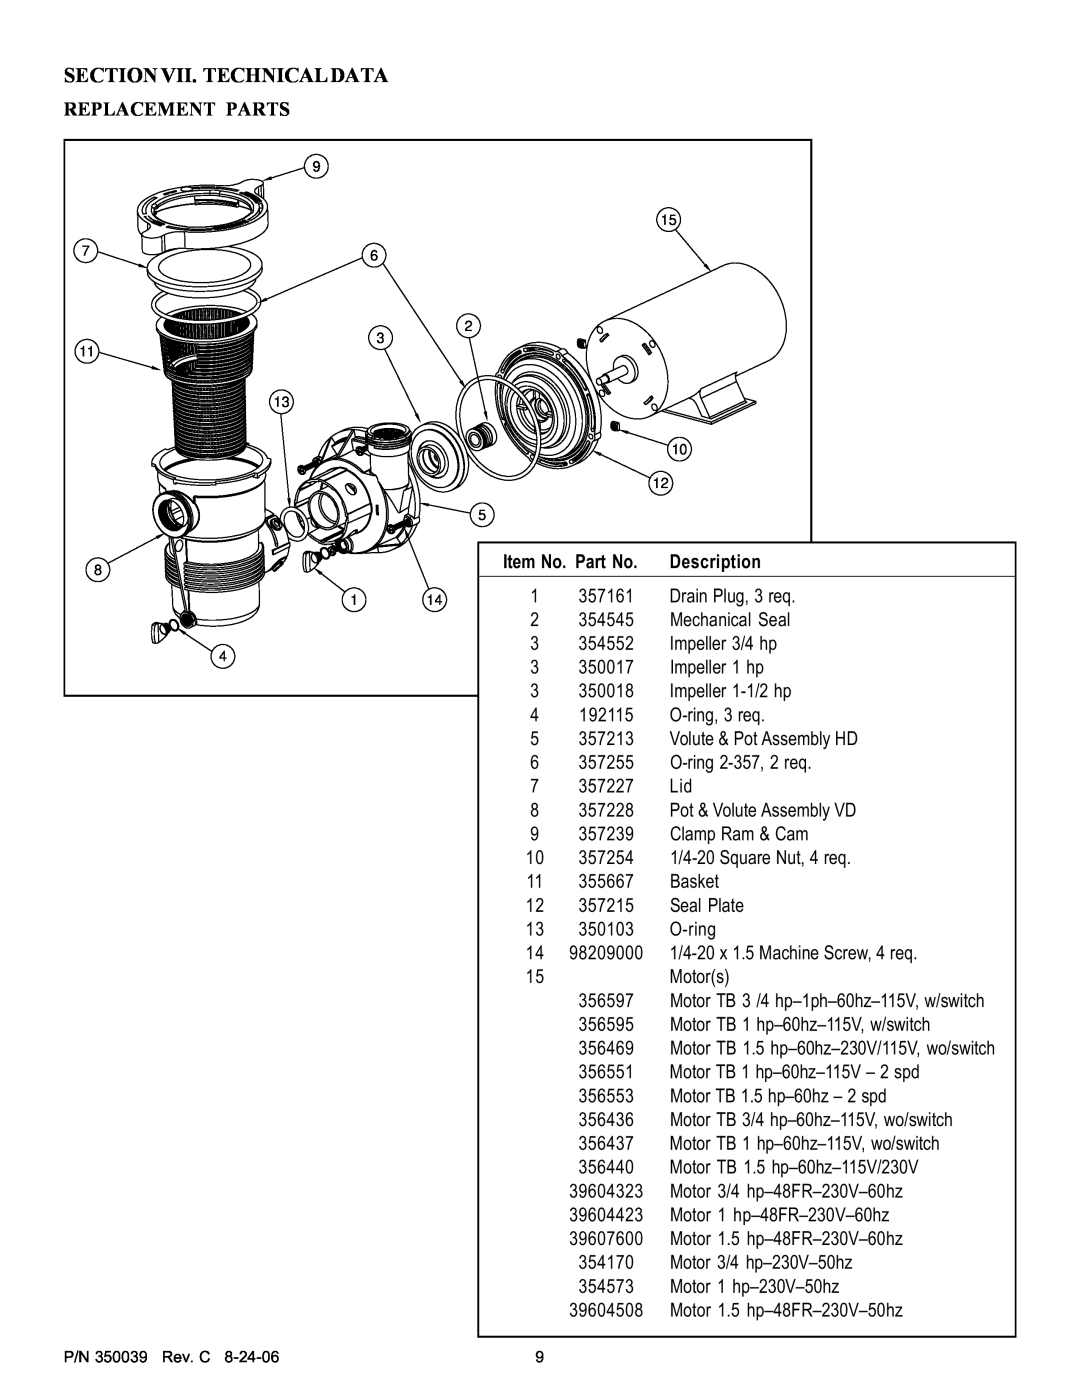 Pentair 4HP-VD - 3' STD, 4HP-HD - 3' STD service manual Sectionvii. Technicaldata, Replacement Parts 